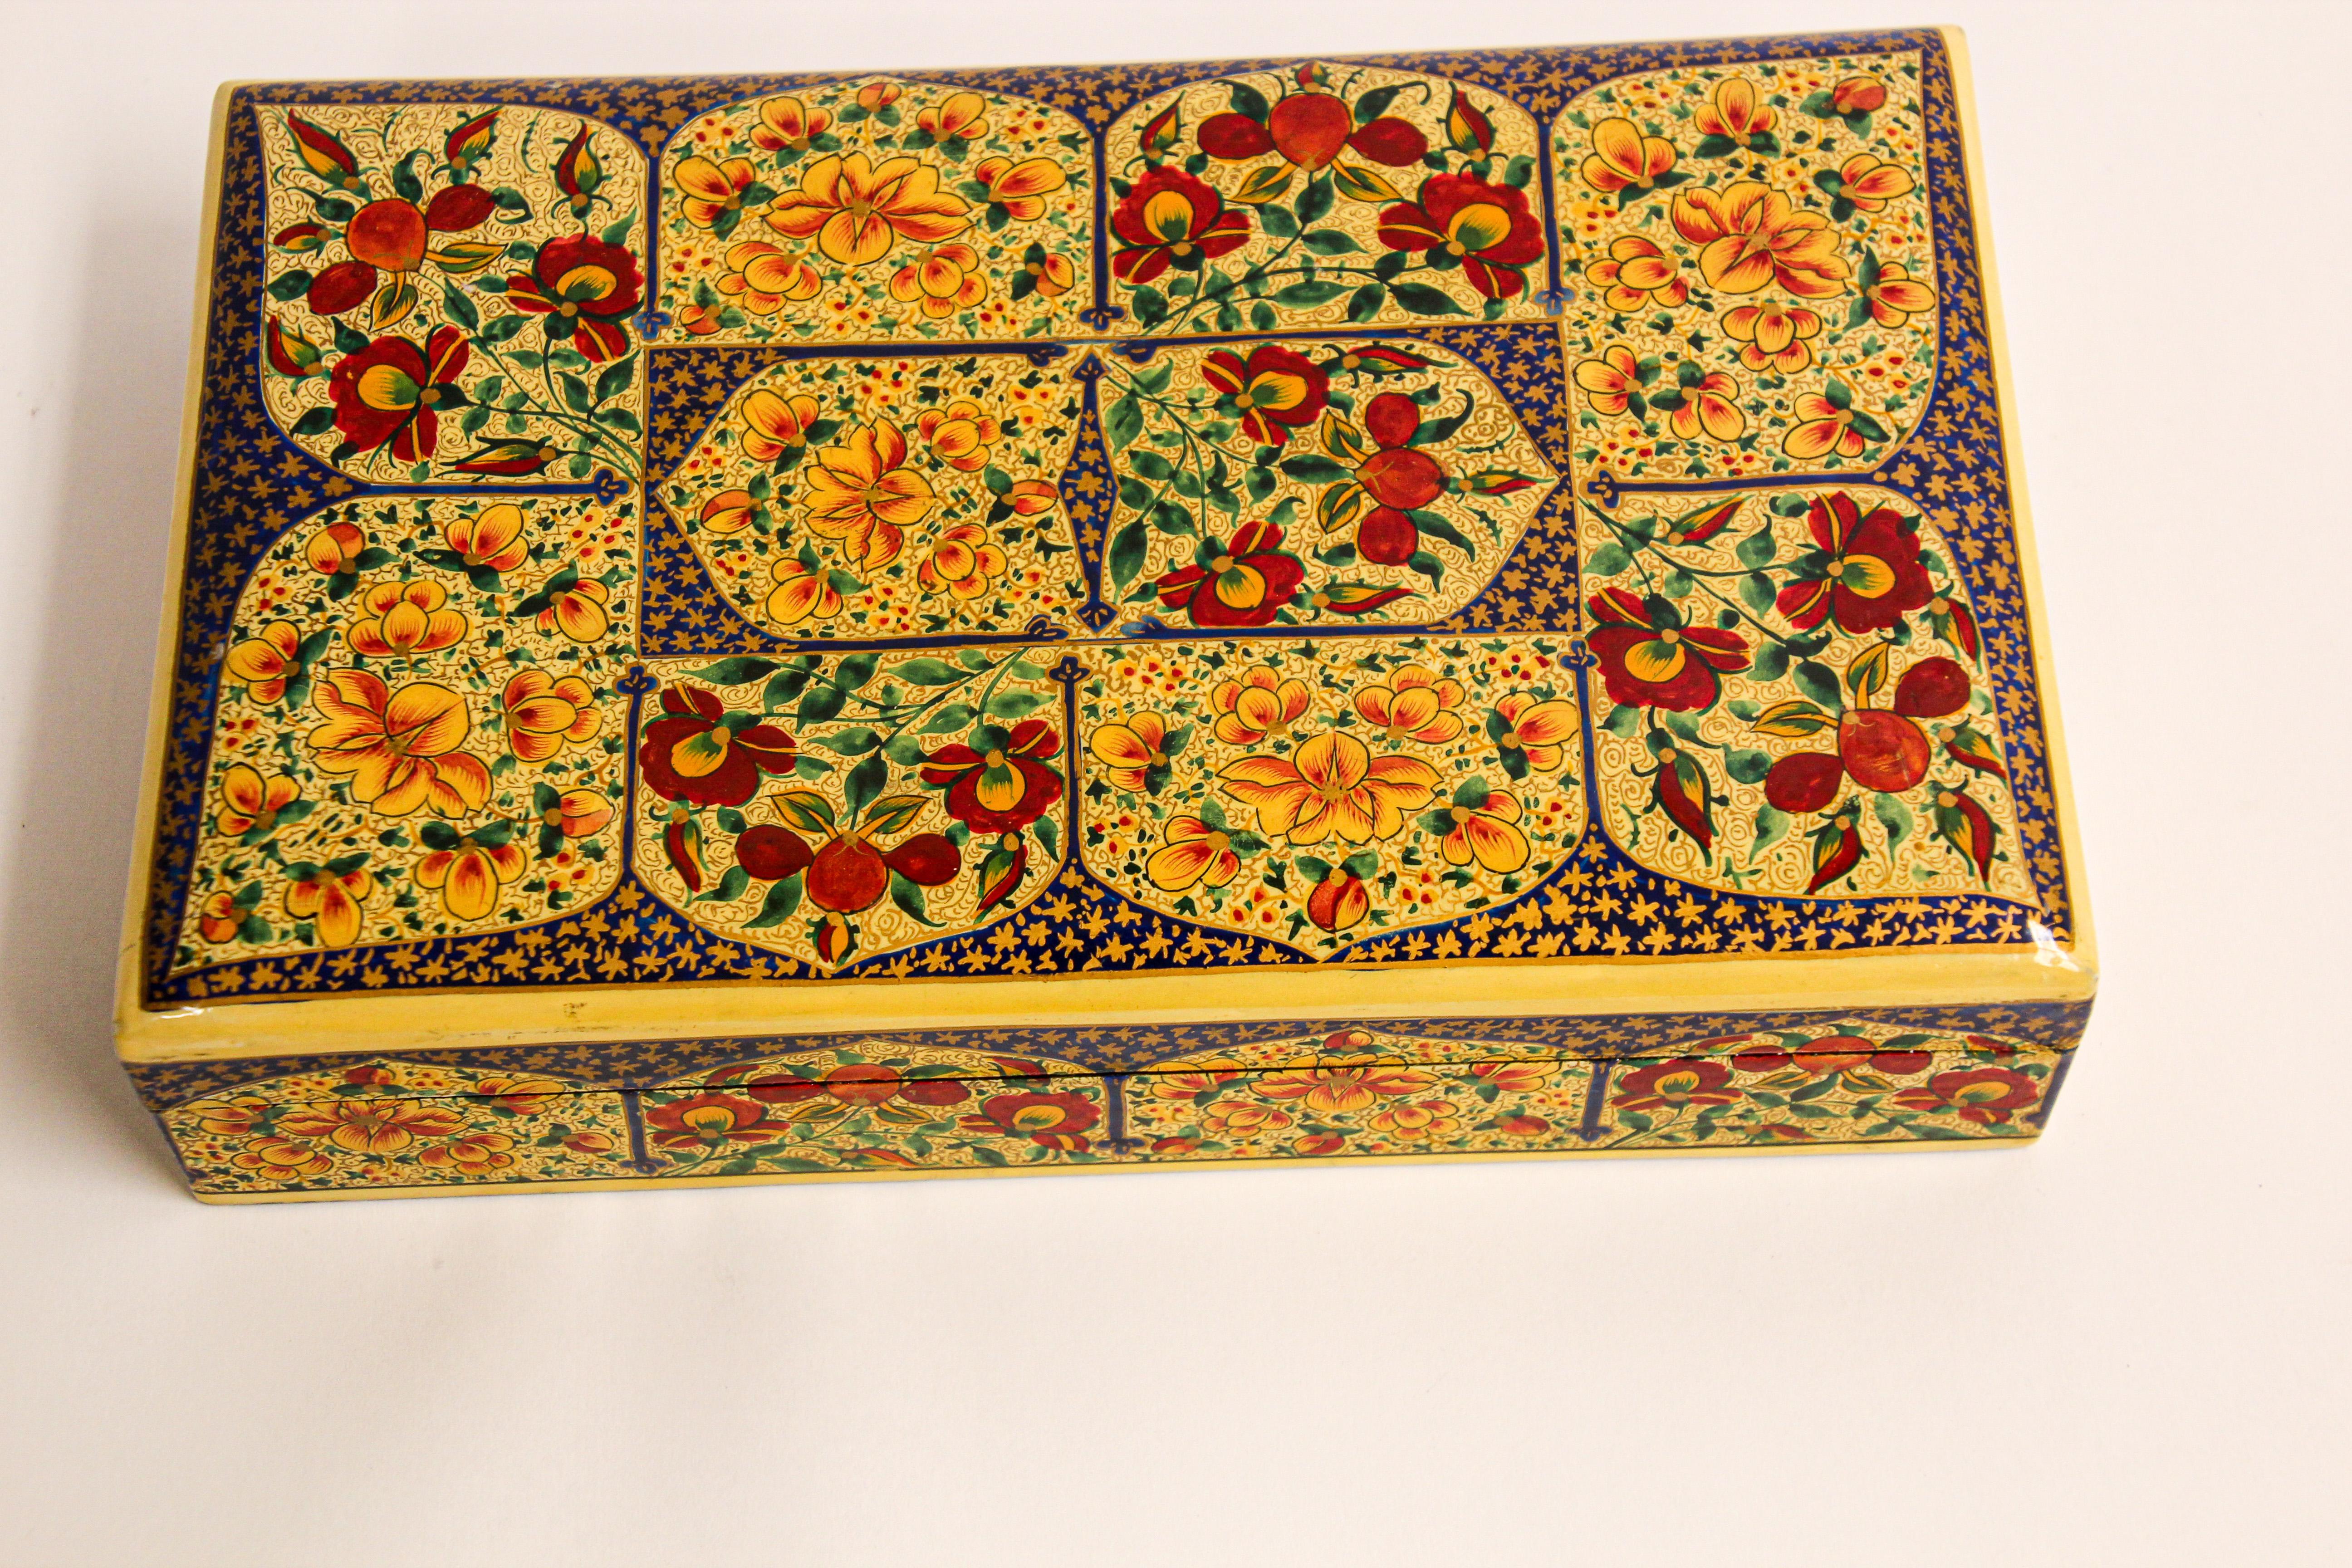 Indian Hand Painted Rajasthani Lacquer Decorative Box For Sale